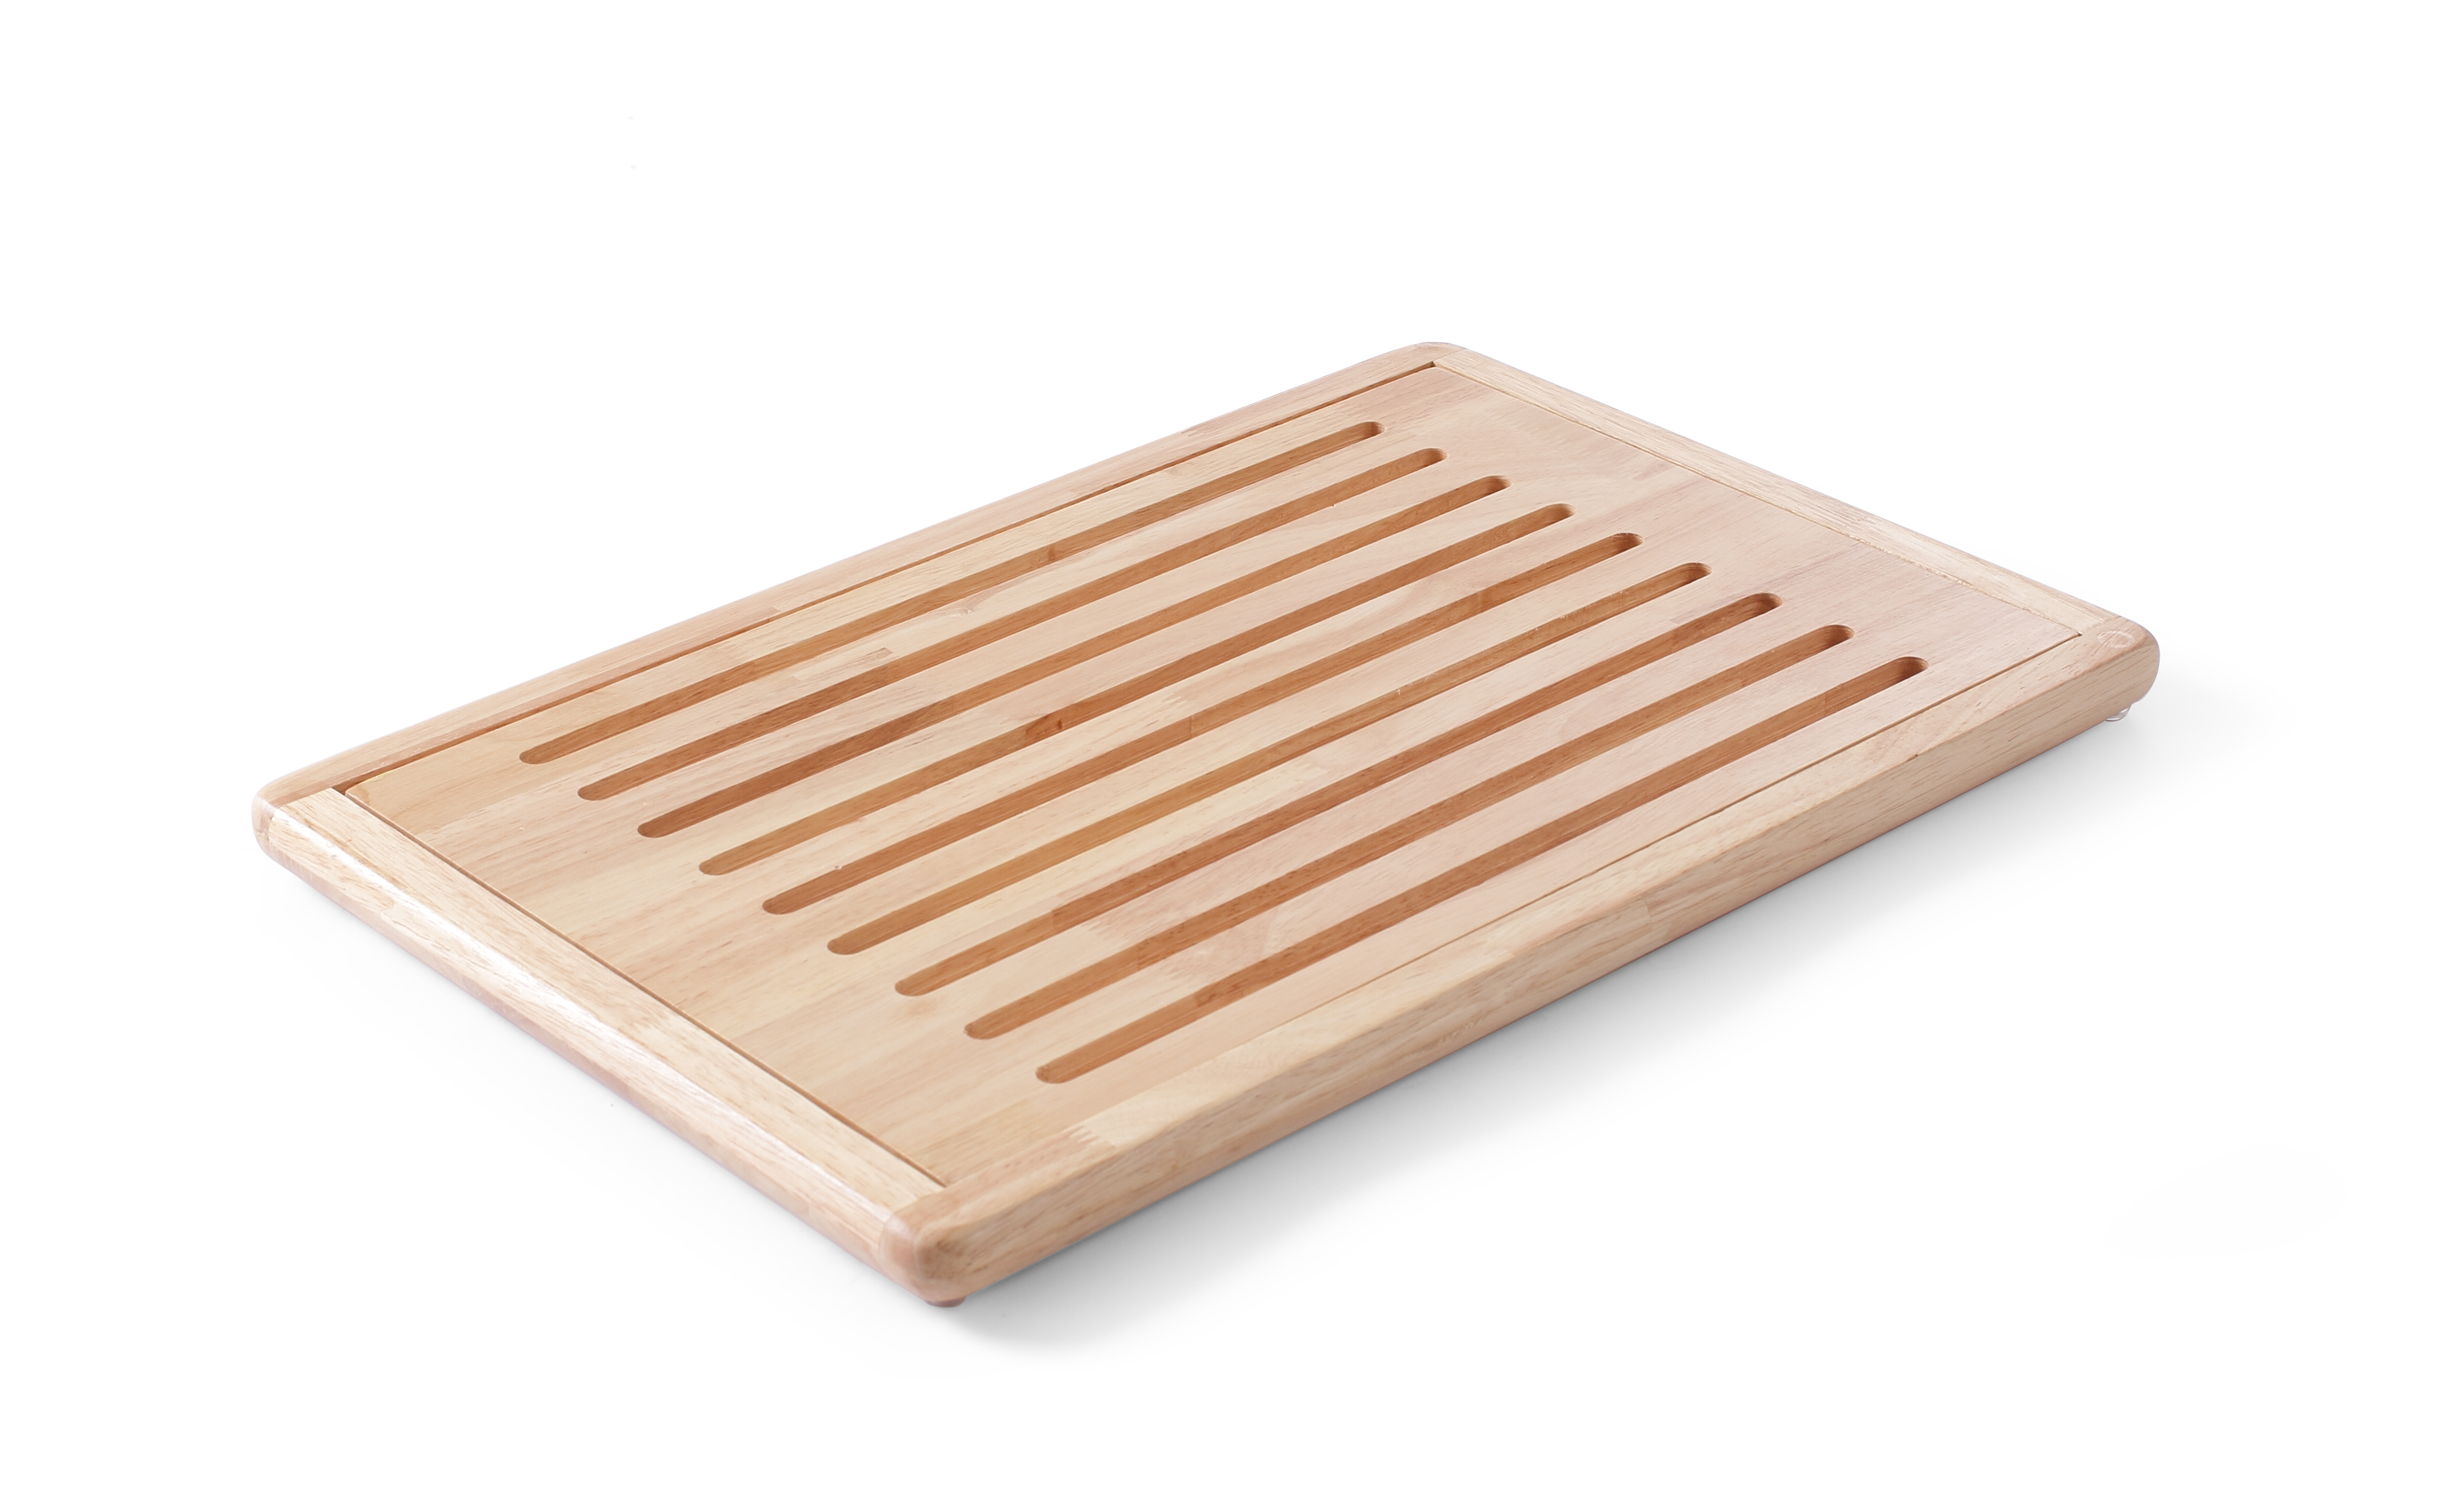 Cutting board for bread with removable crumb tray.